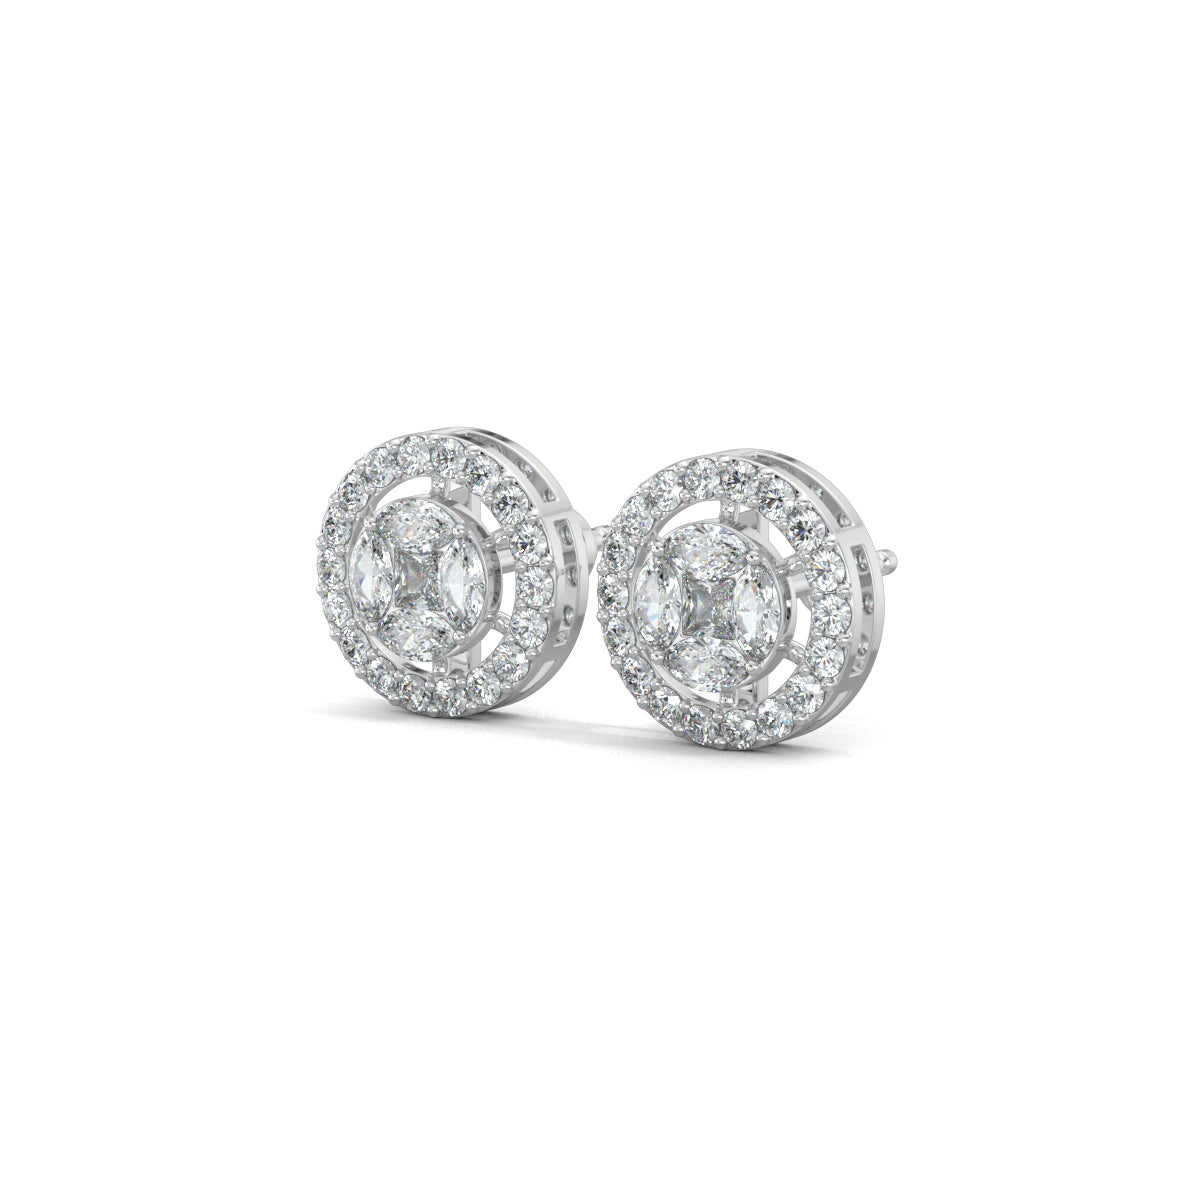 White Gold, Diamond Earrings, Cirque Crown Stud Earrings, Natural diamonds, Lab-grown diamond halo setting studs with round, princess cut, and marquise diamonds